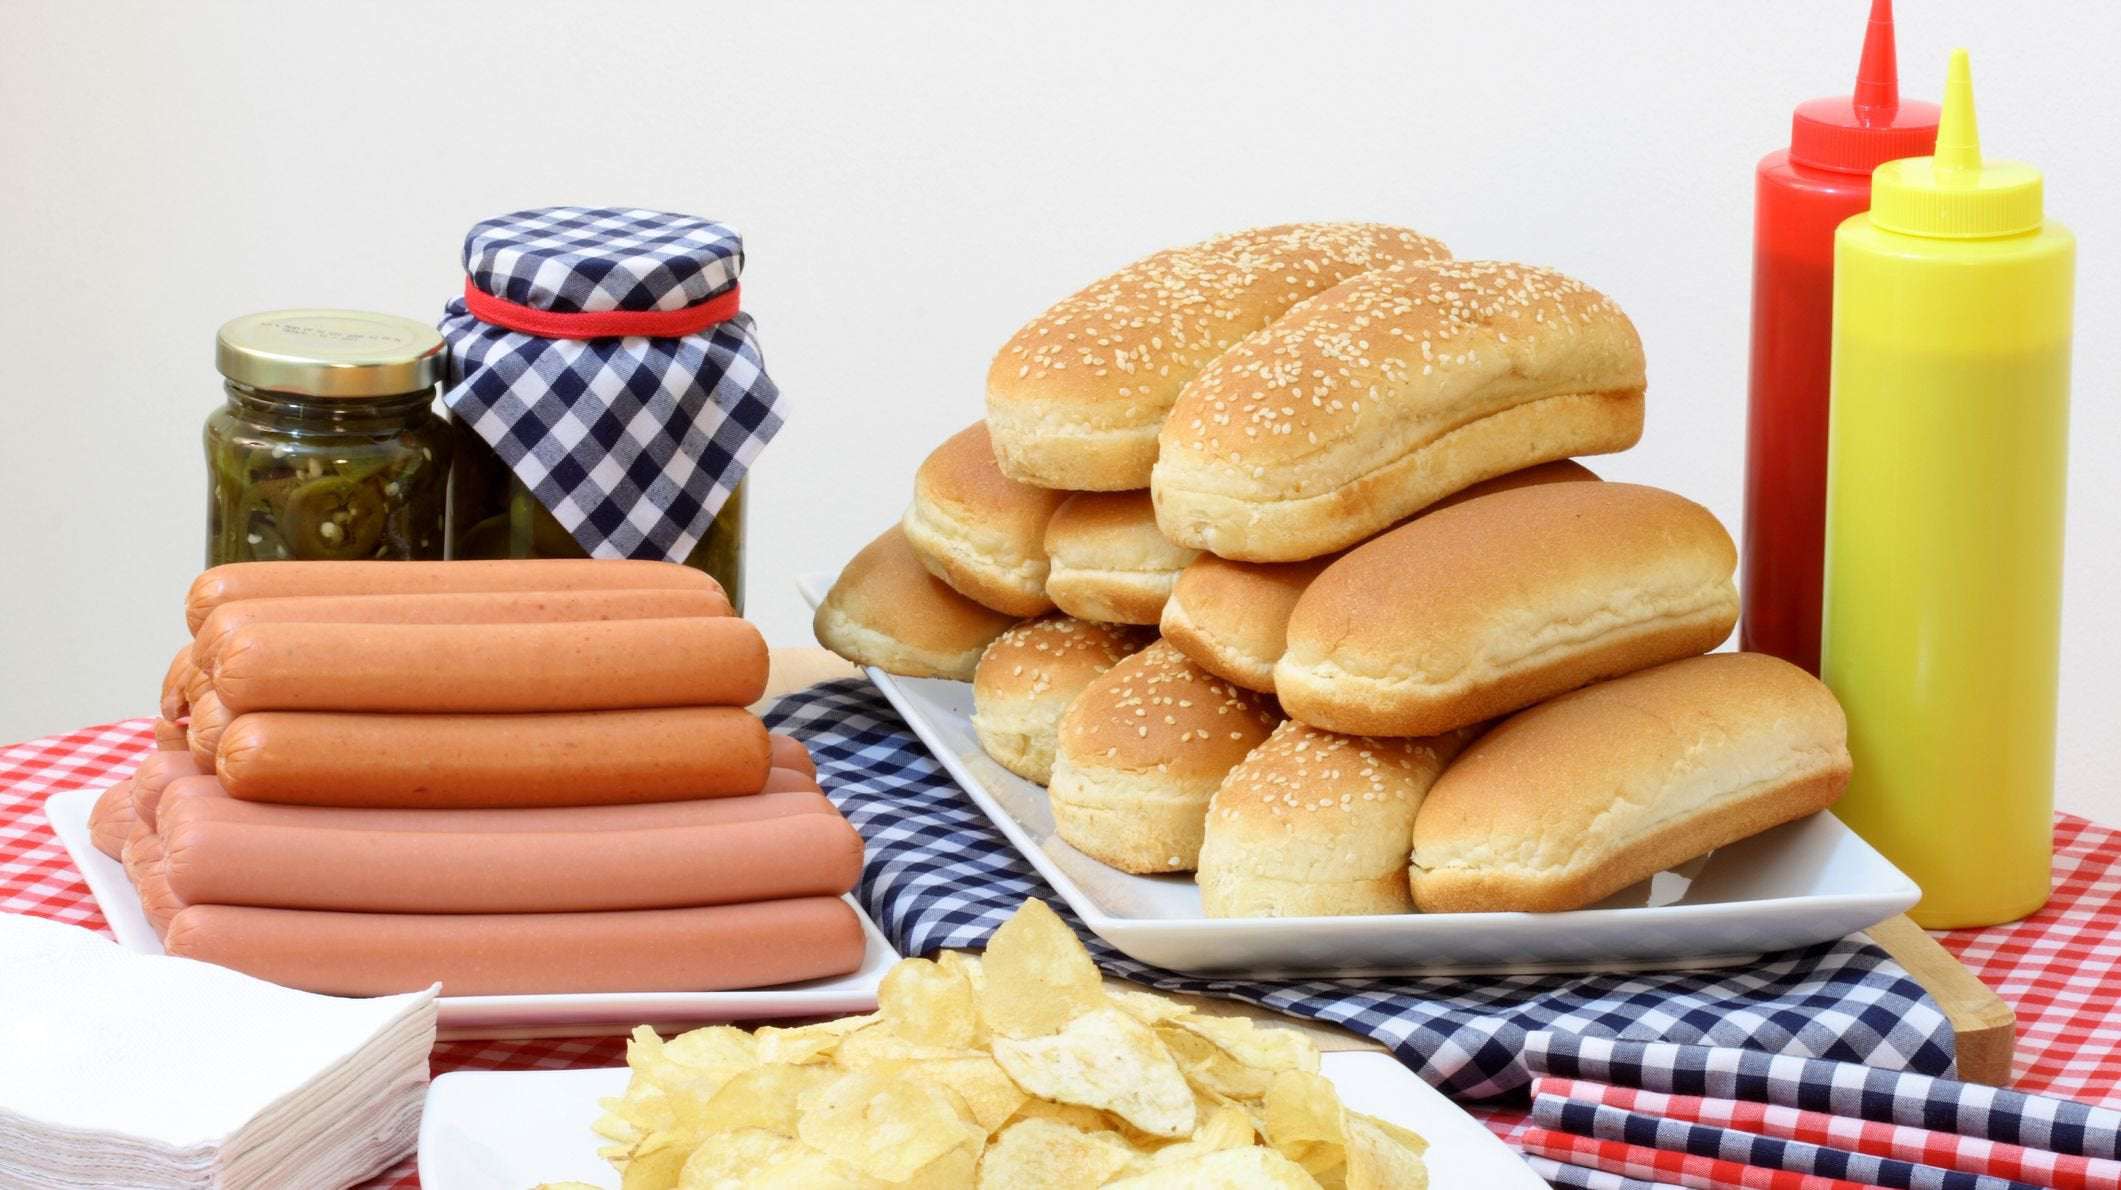 image for Why Are There 10 Hot Dogs to a Pack But Only 8 Buns?